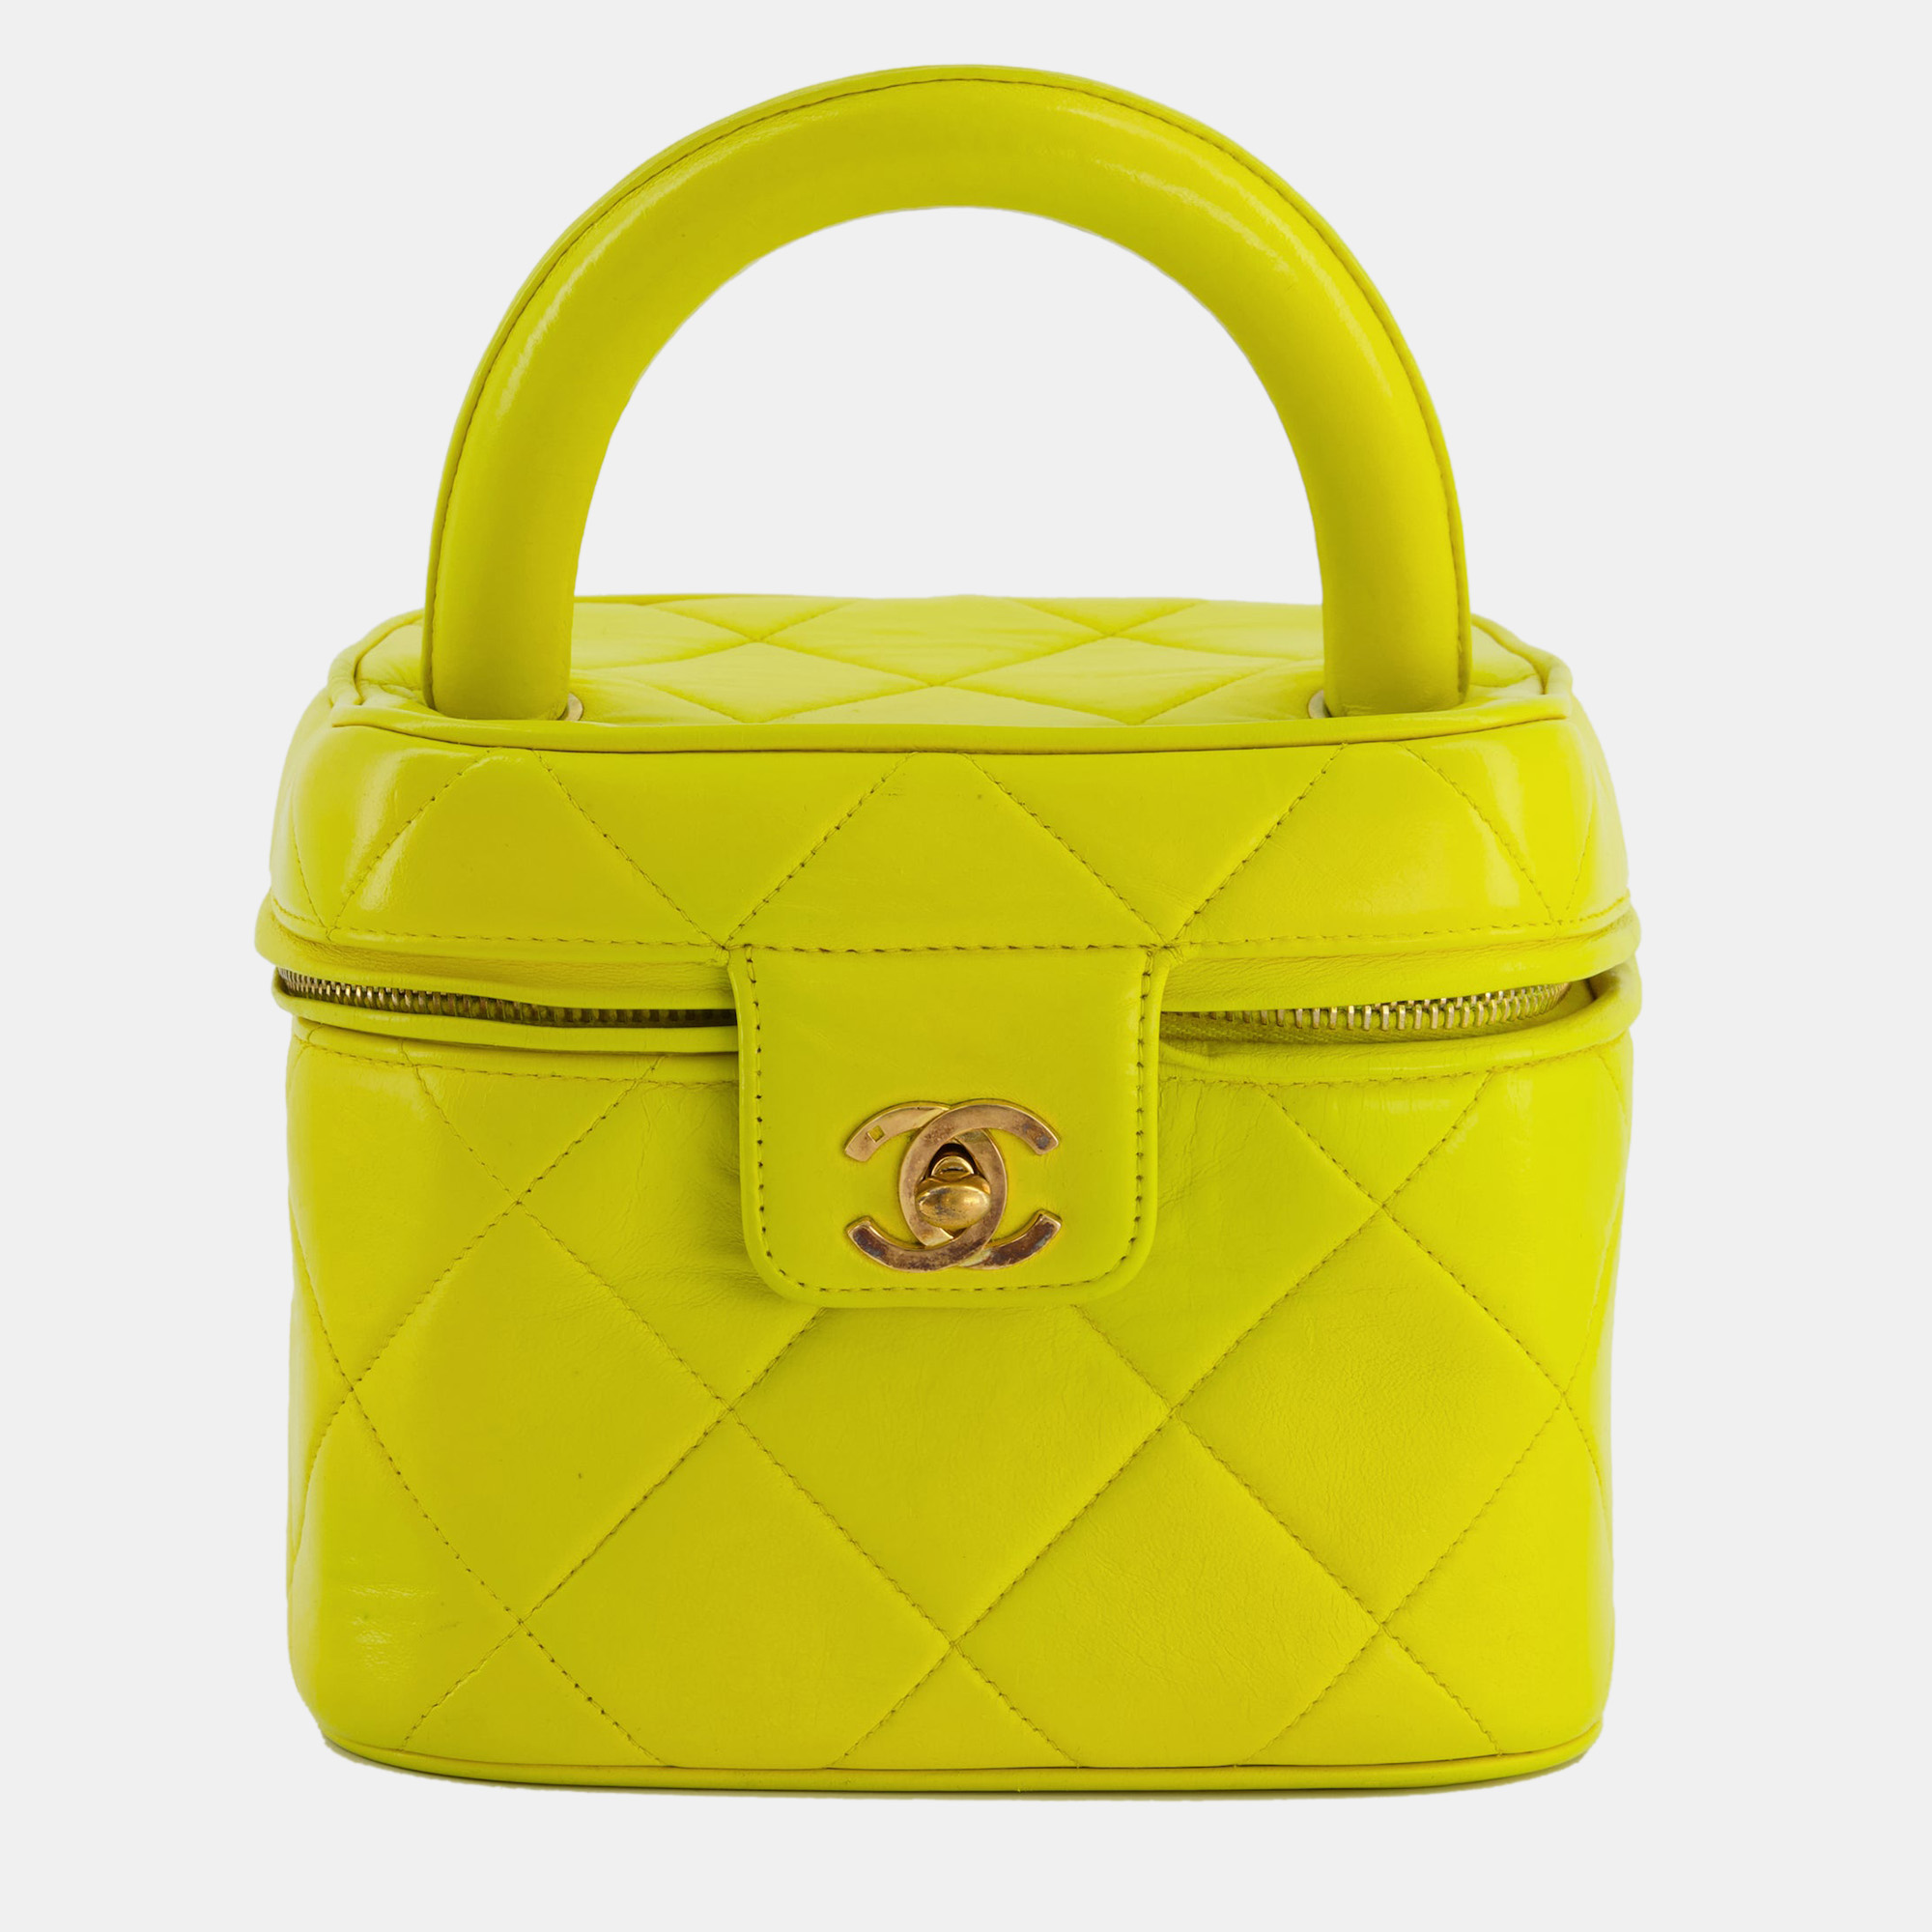 Chanel yellow vintage top handle vanity bag in lambskin leather with 24k gold hardware